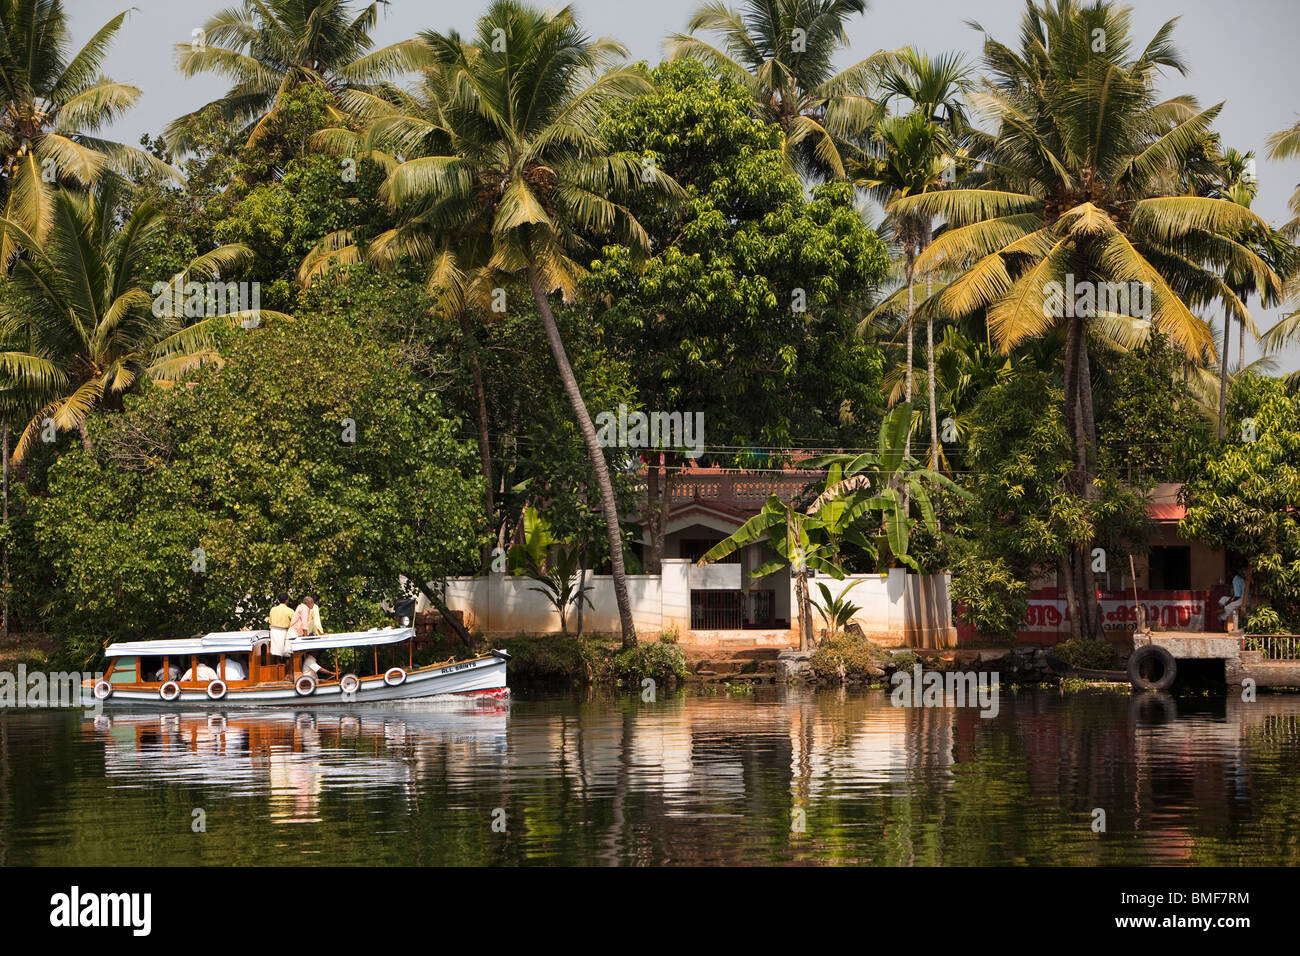 India, Kerala, Alappuzha, Chennamkary, backwaters, small local boat taking mourners to funeral Stock Photo